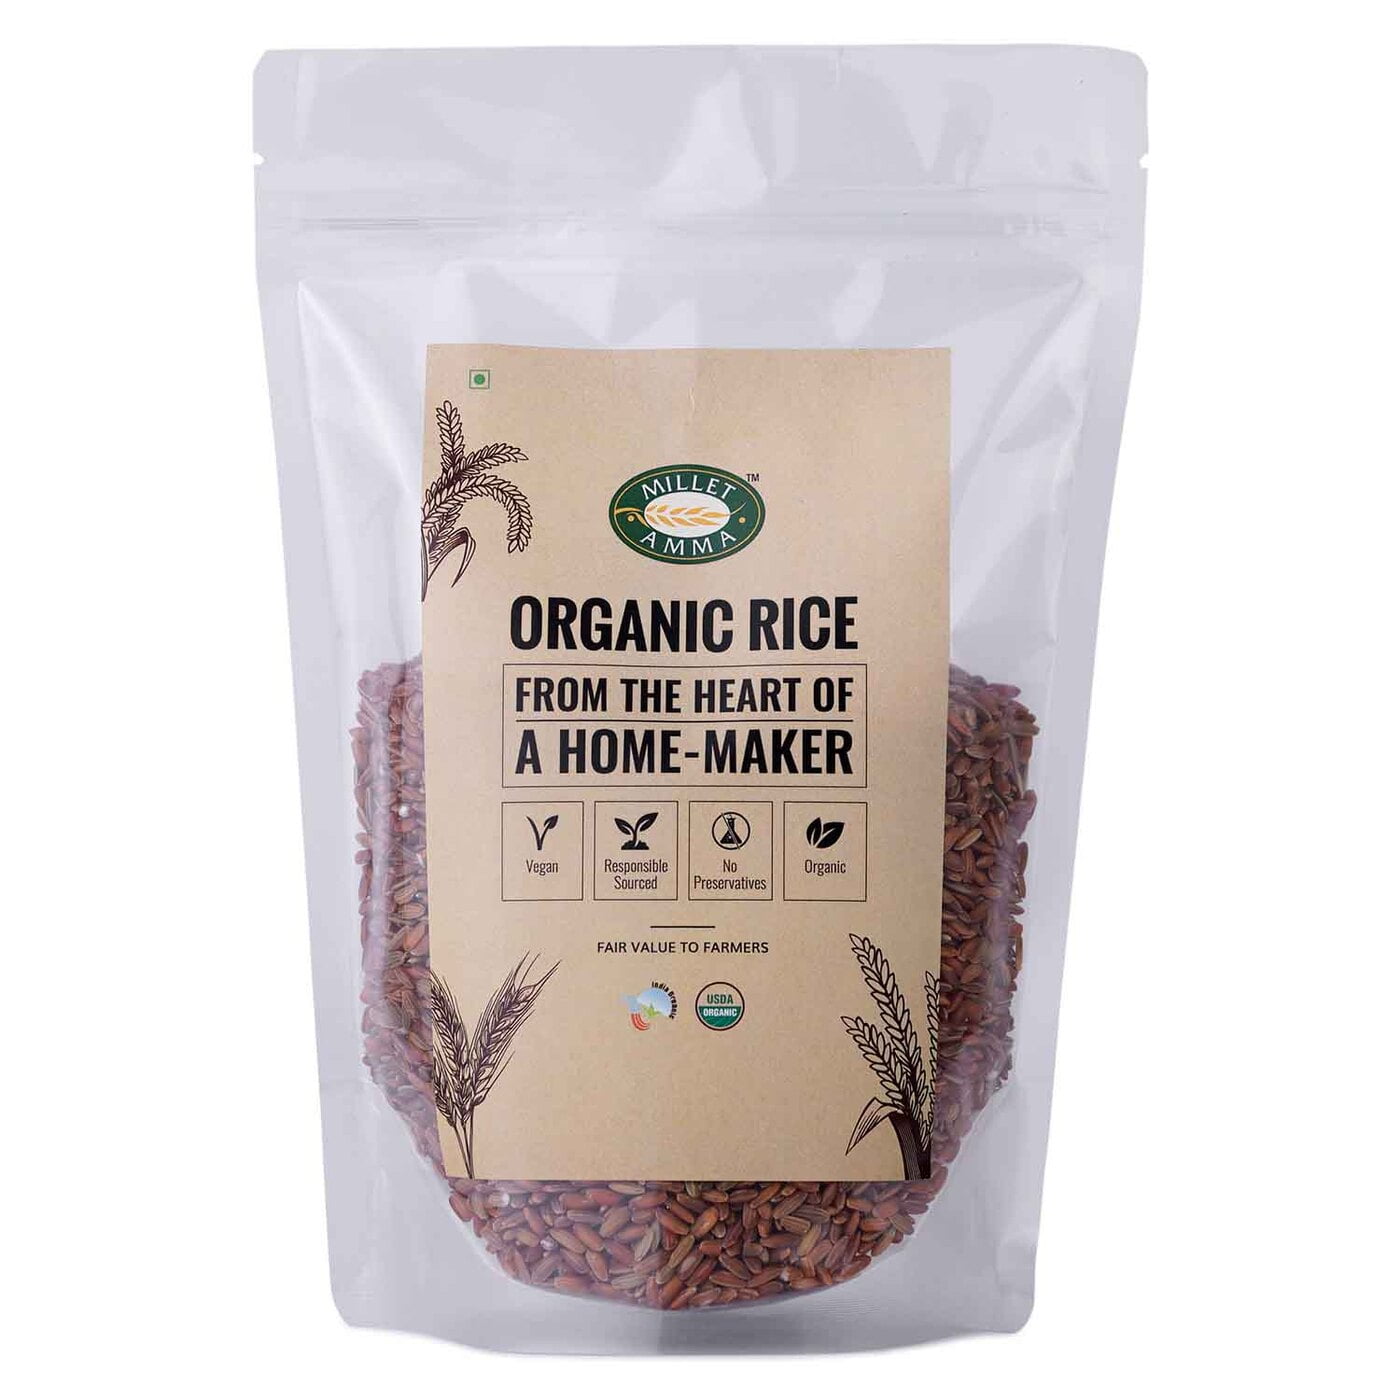 Red rice contains fibers that help you to flush out toxins from your body and keeps you energetic.  Eating Red rice daily helps in decreasing the bad cholesterol level and increasing the good cholesterol level.  Having Red rice increases your energy level.